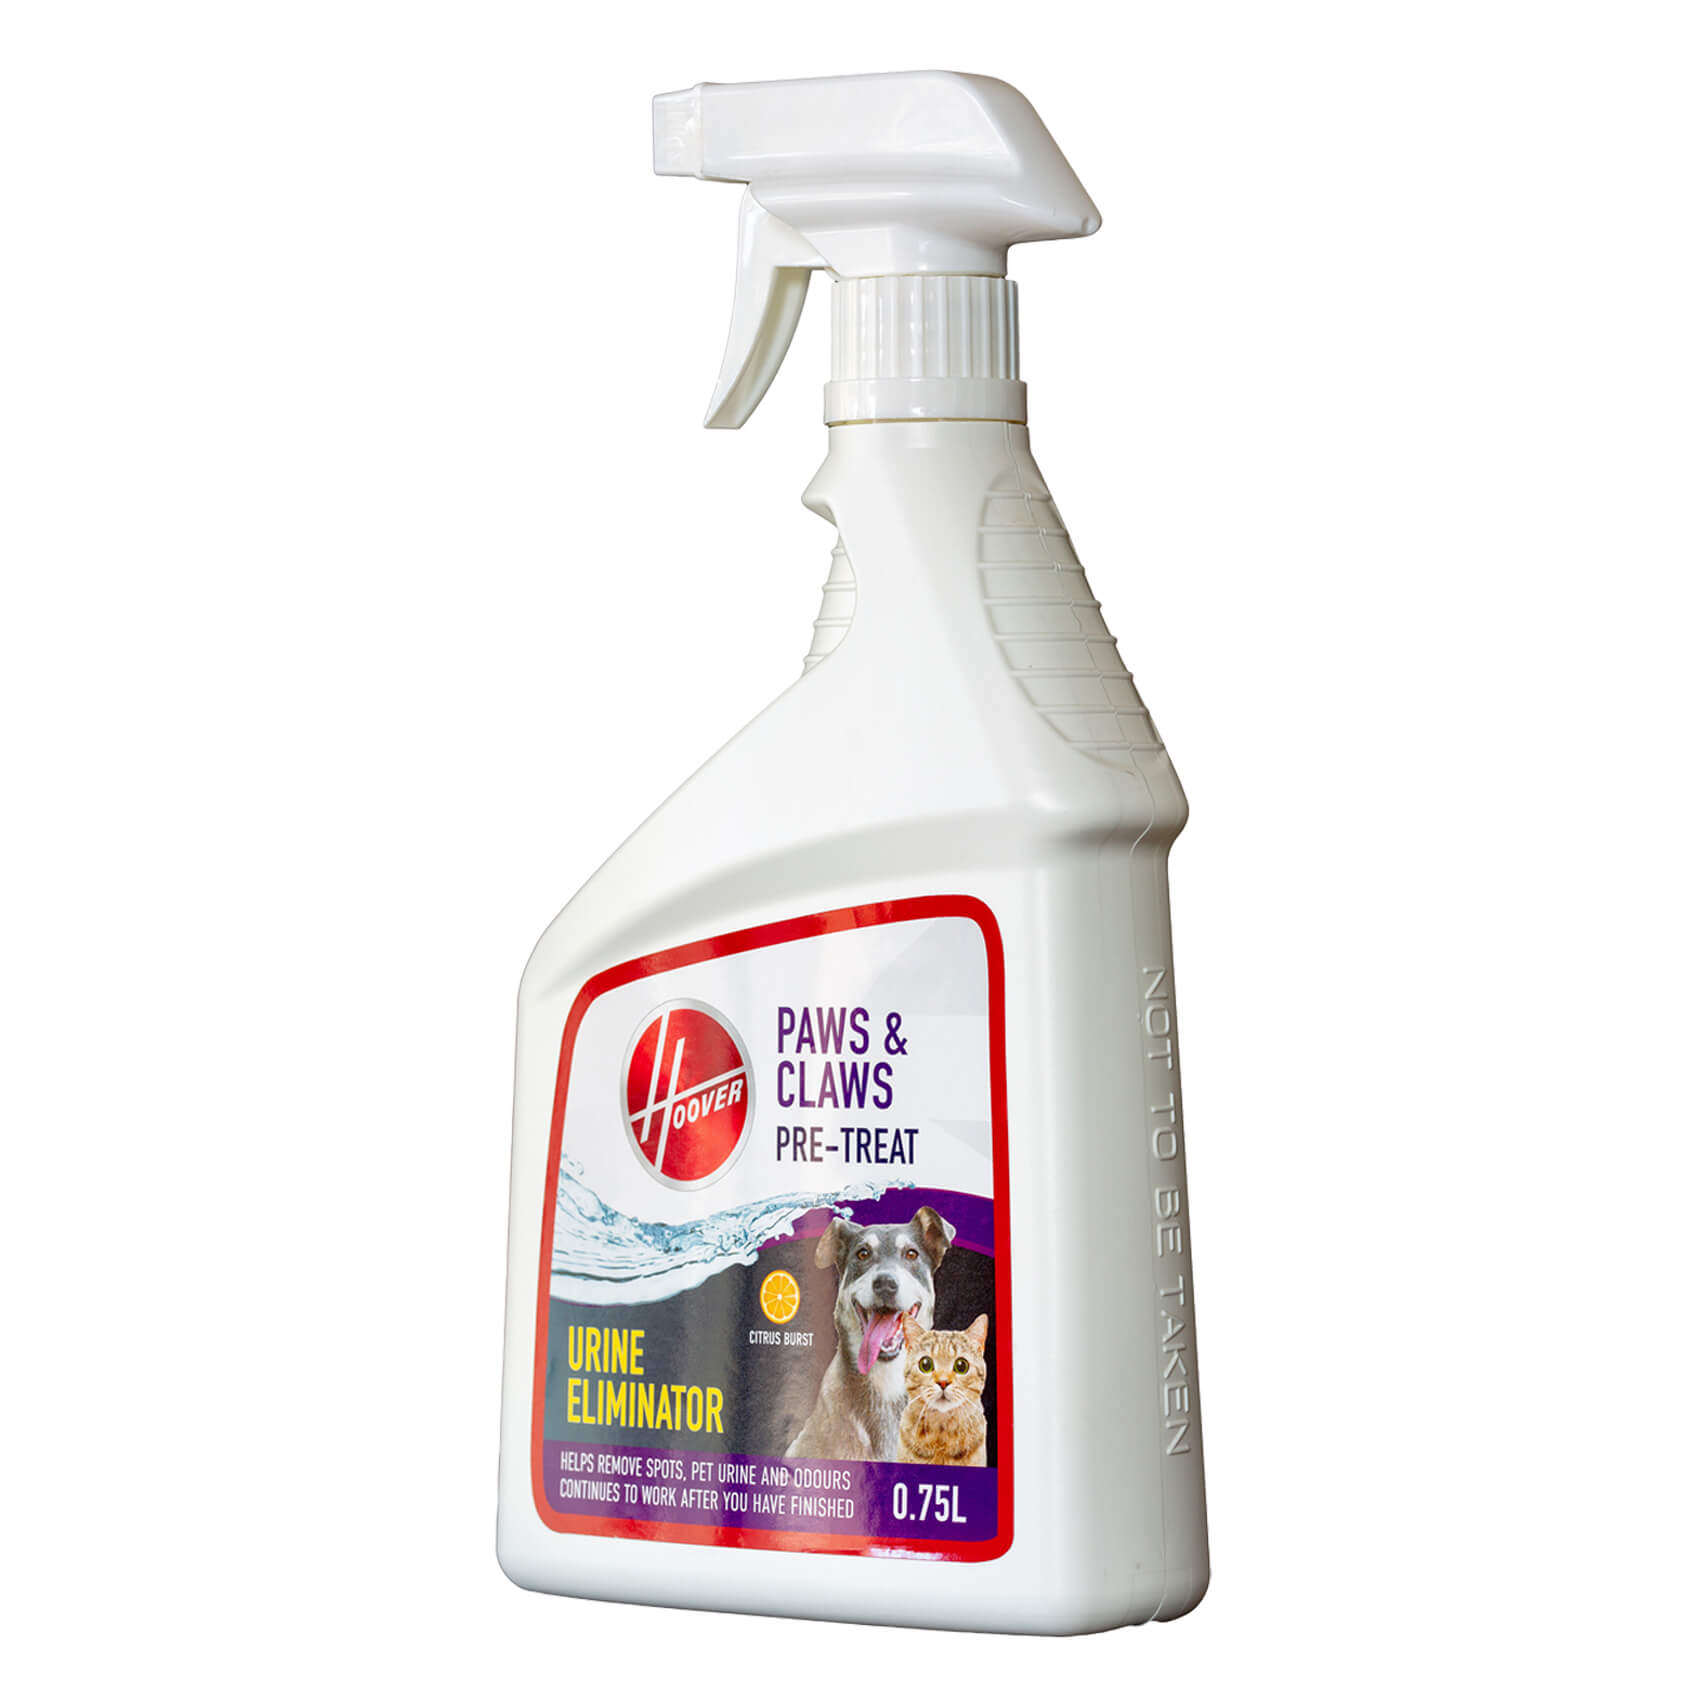 Hoover Paws & Claws Urine Eliminator Pre-Treat Spray. 750ml Bottle